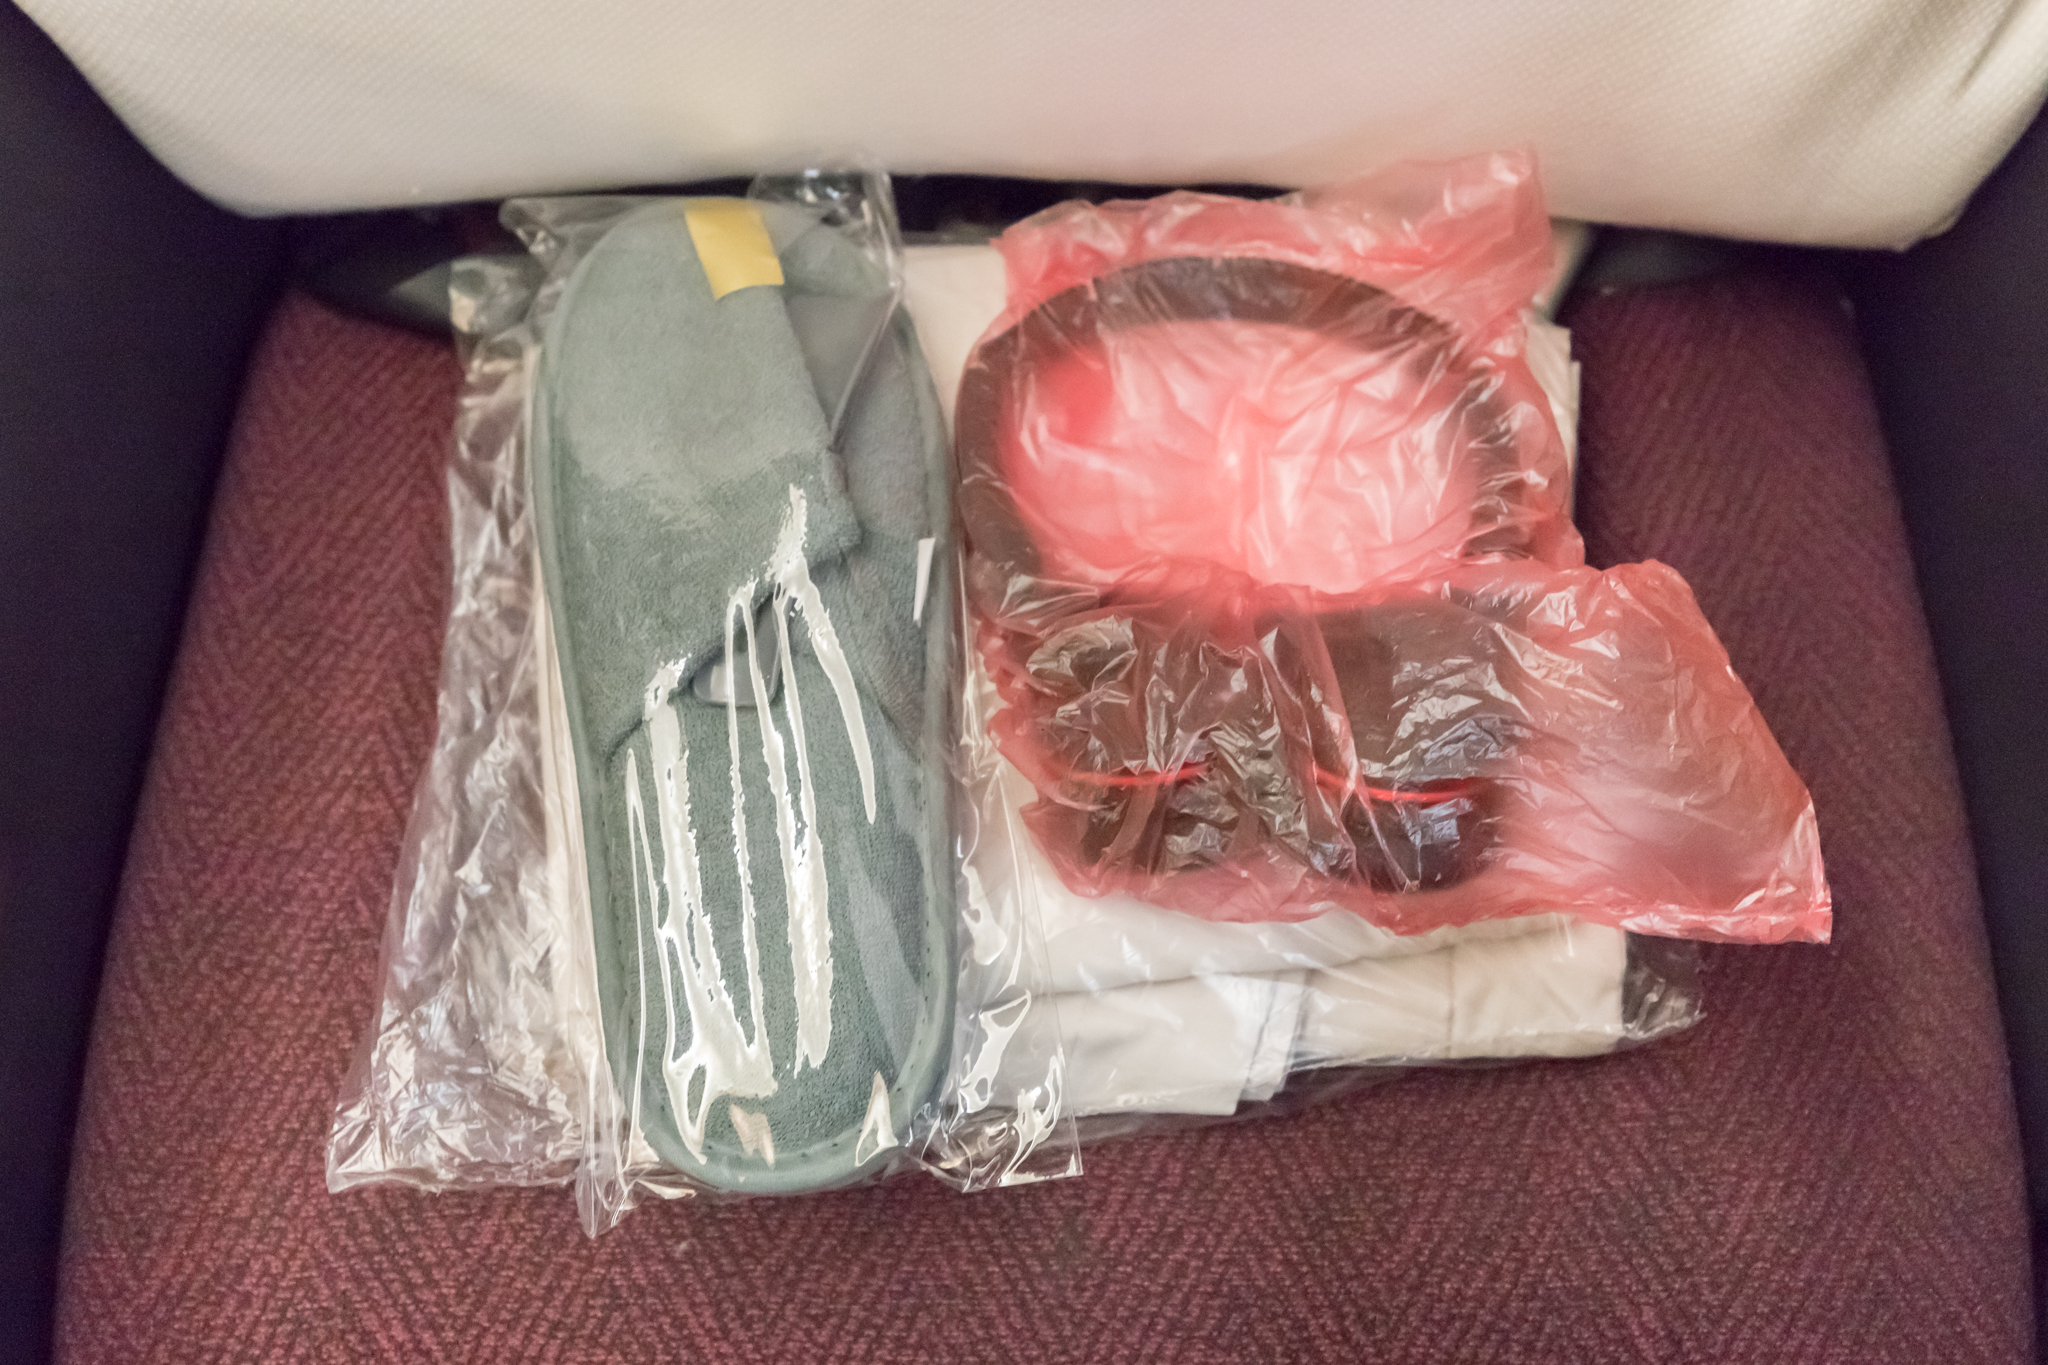 a pair of slippers and headphones in a plastic bag